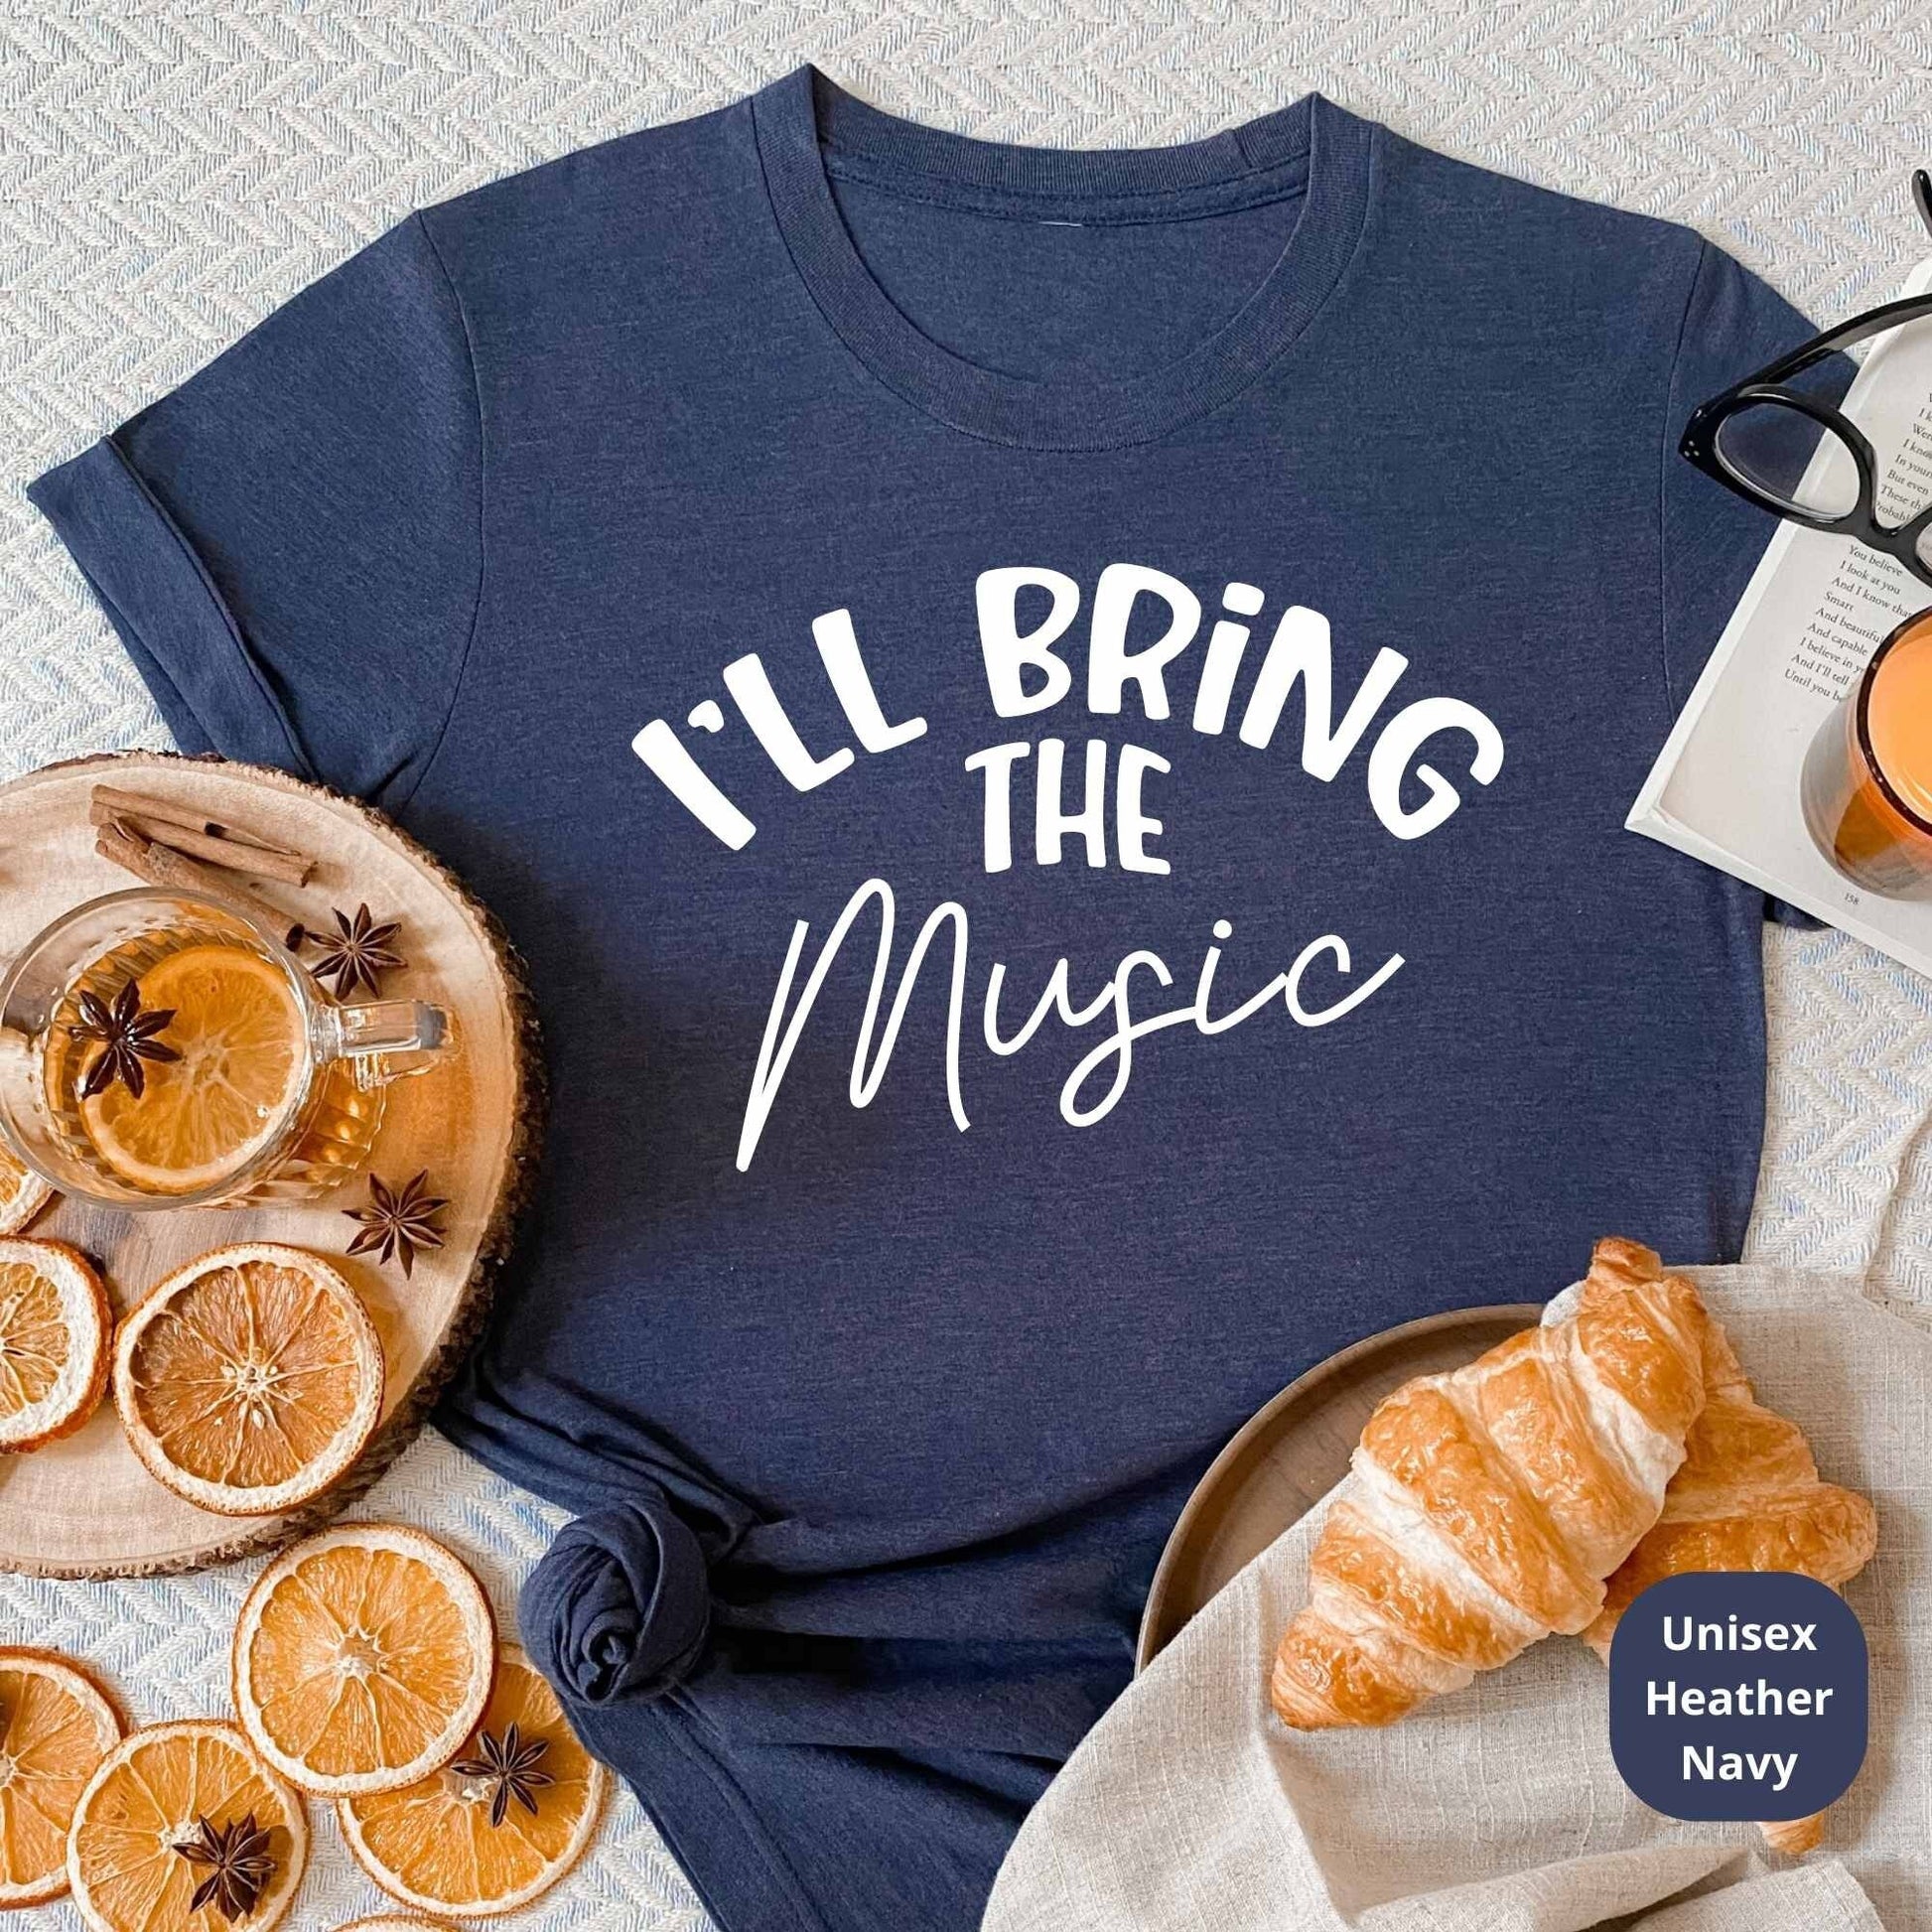 I'll Bring The...Funny 60th Birthday Party Shirts, Celebrate in Style with Our Fun and Funky Birthday Shirt! HMDesignStudioUS